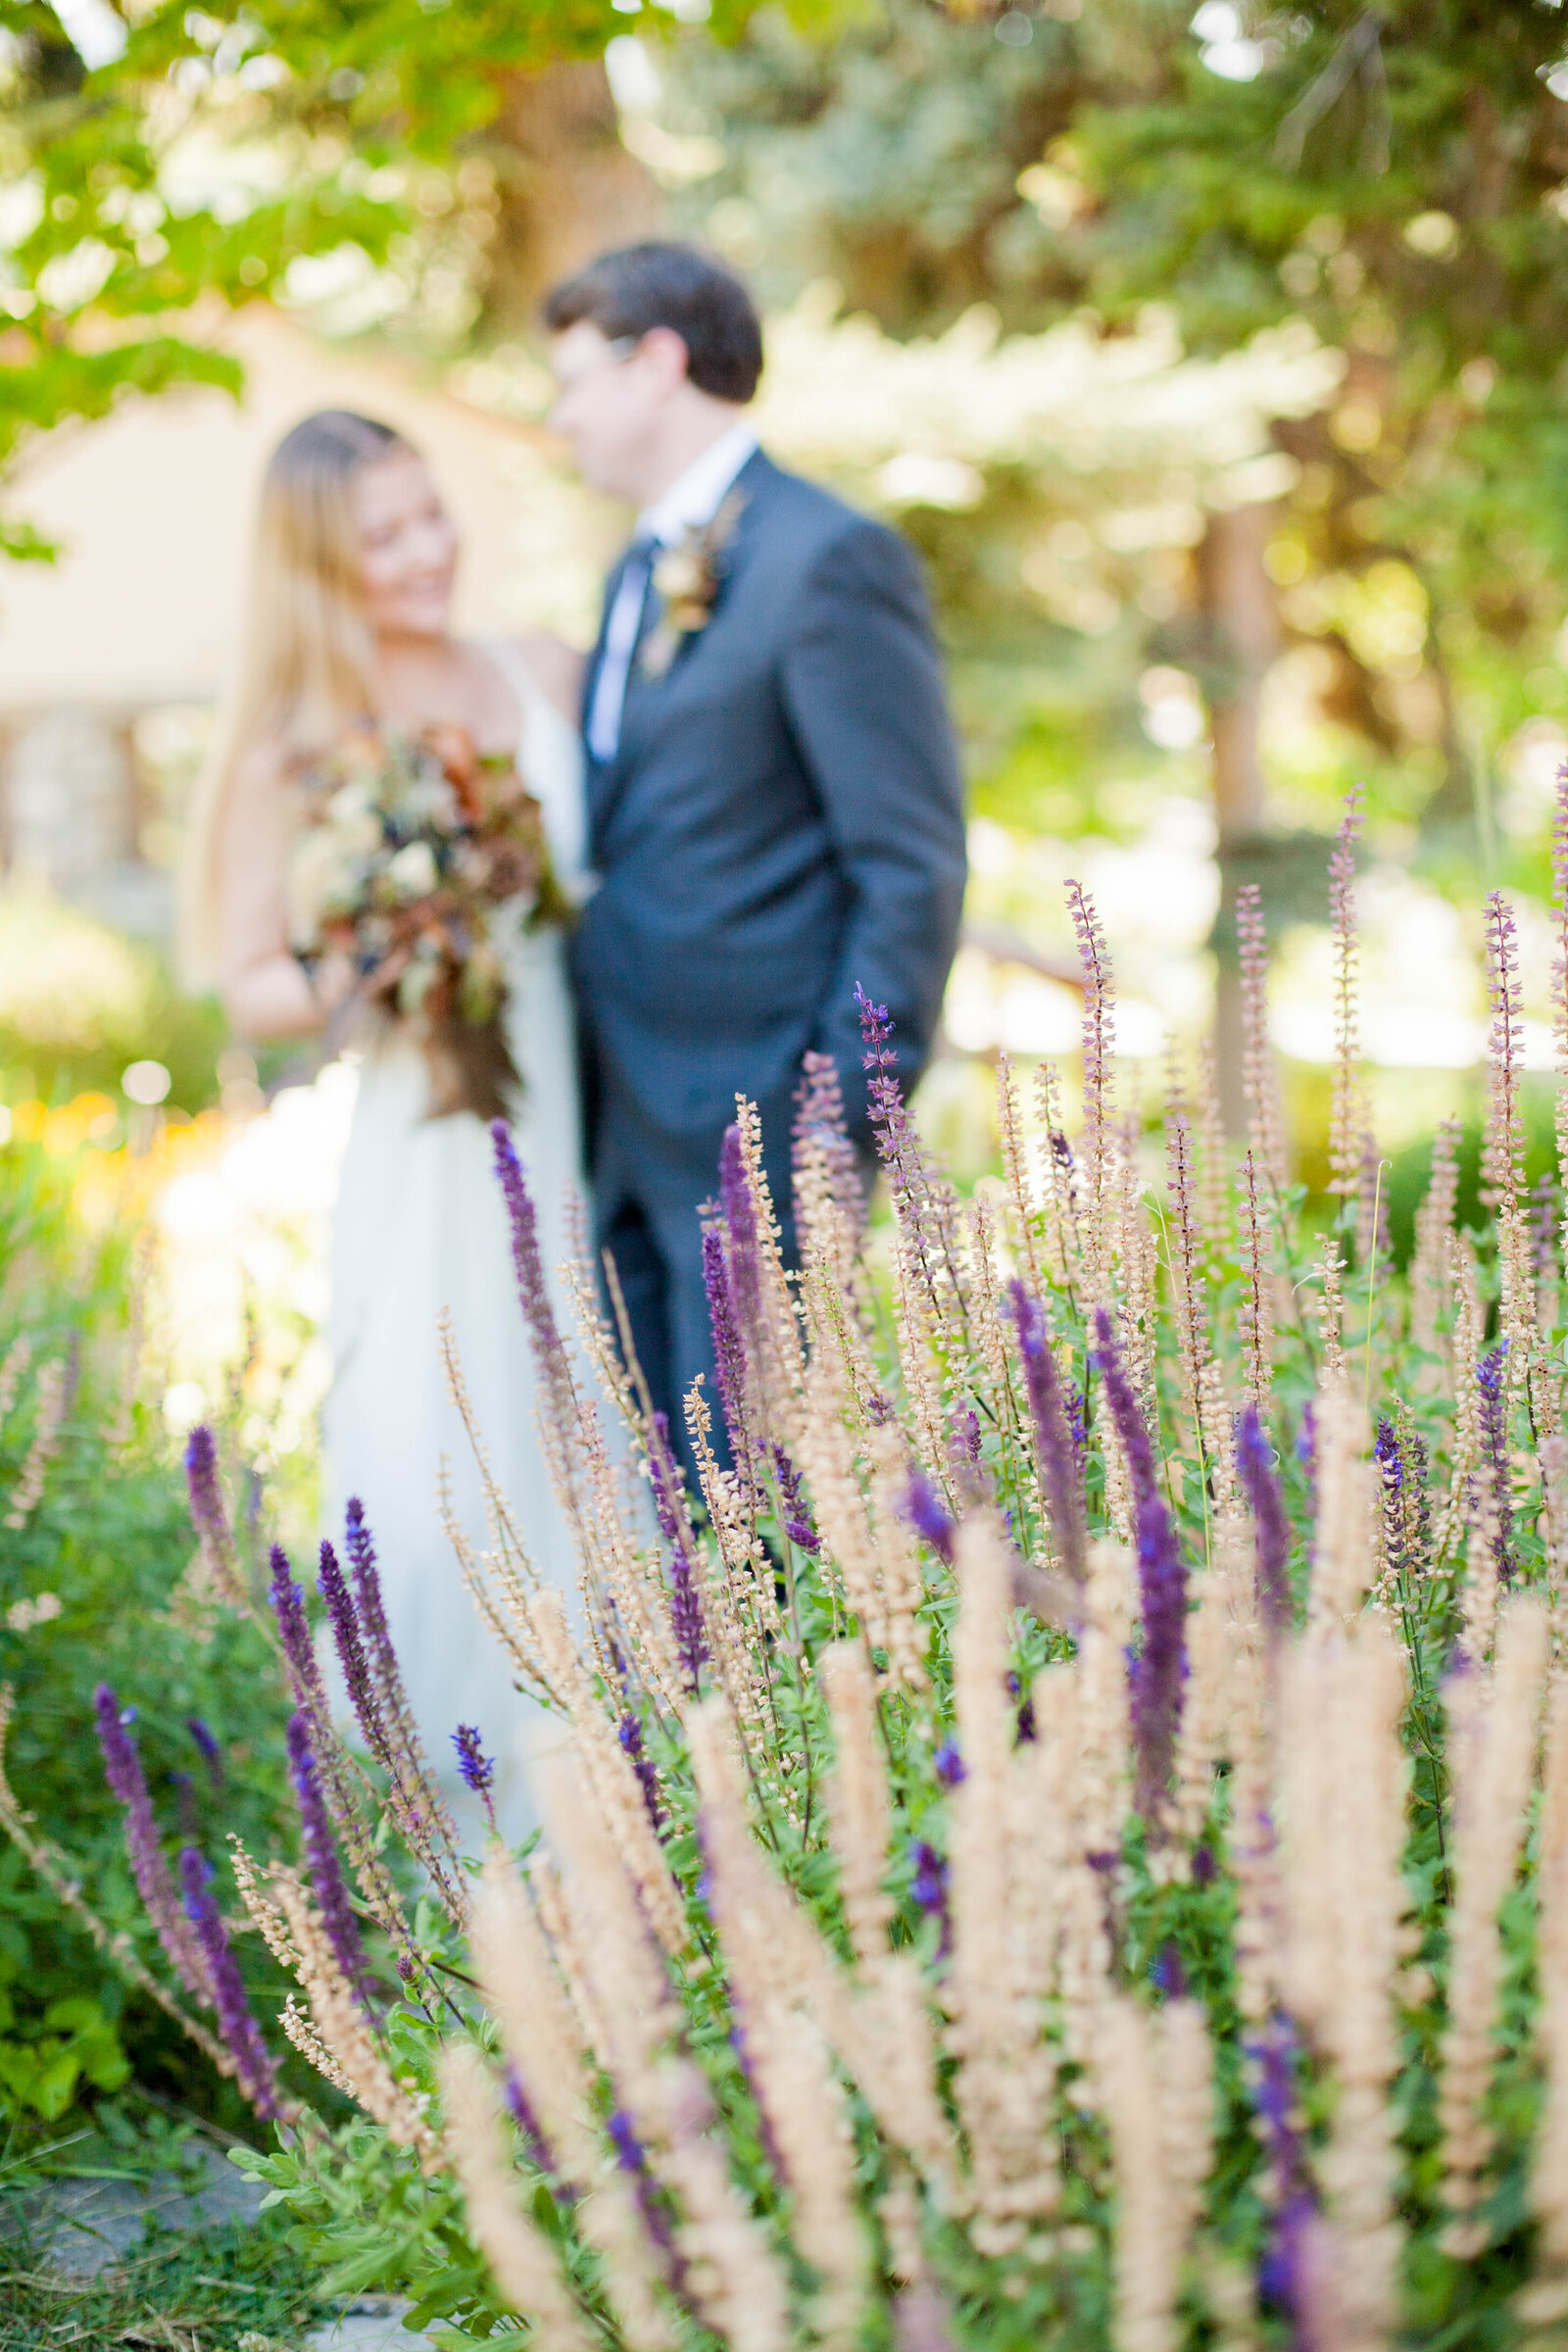 A married couple embracing in front of lavender.